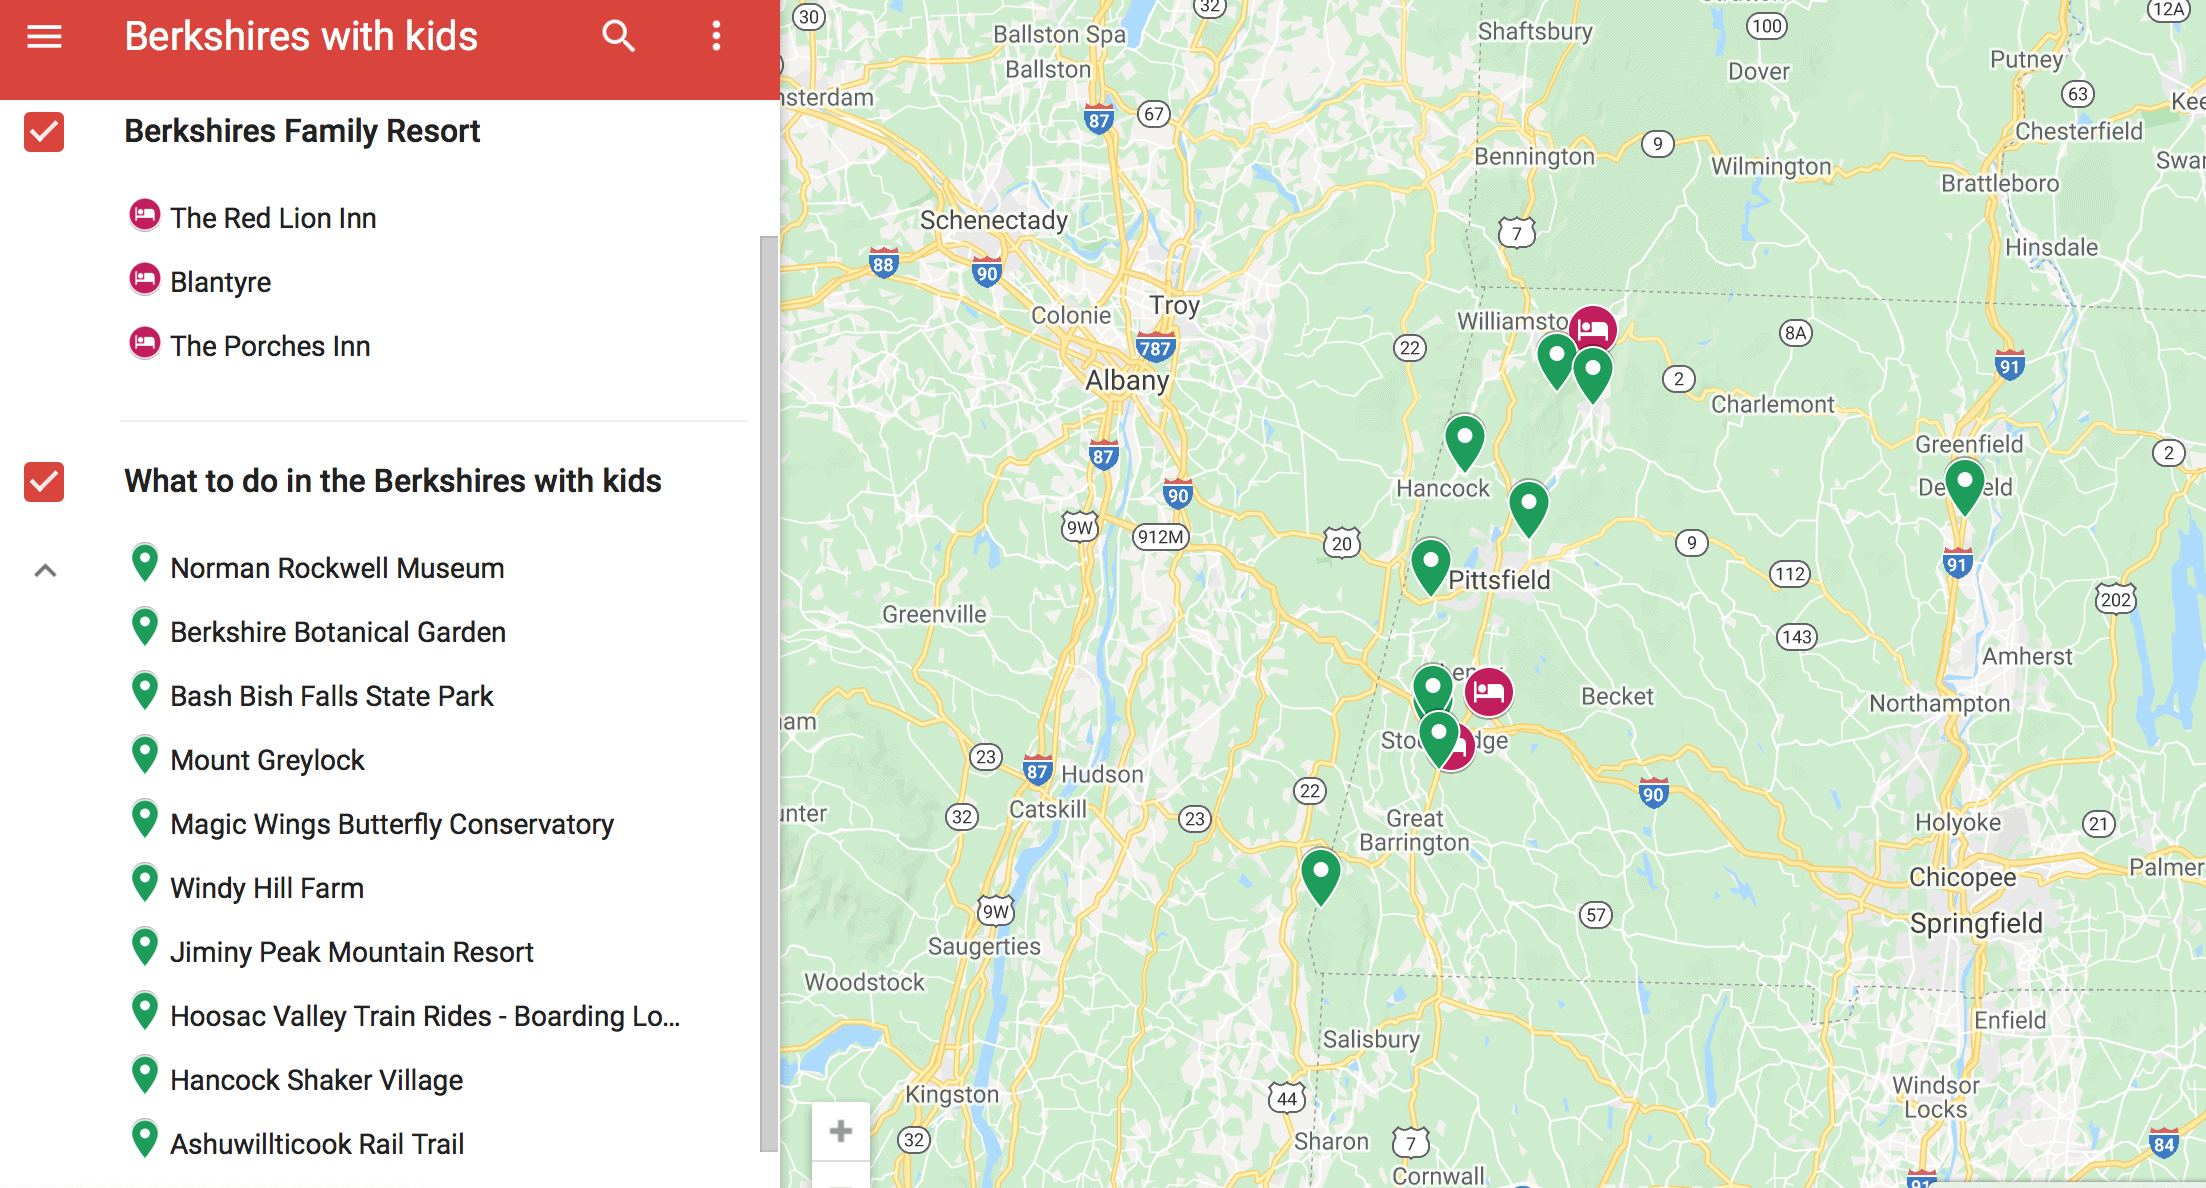 A map of Berkshires MA with things to do for kids